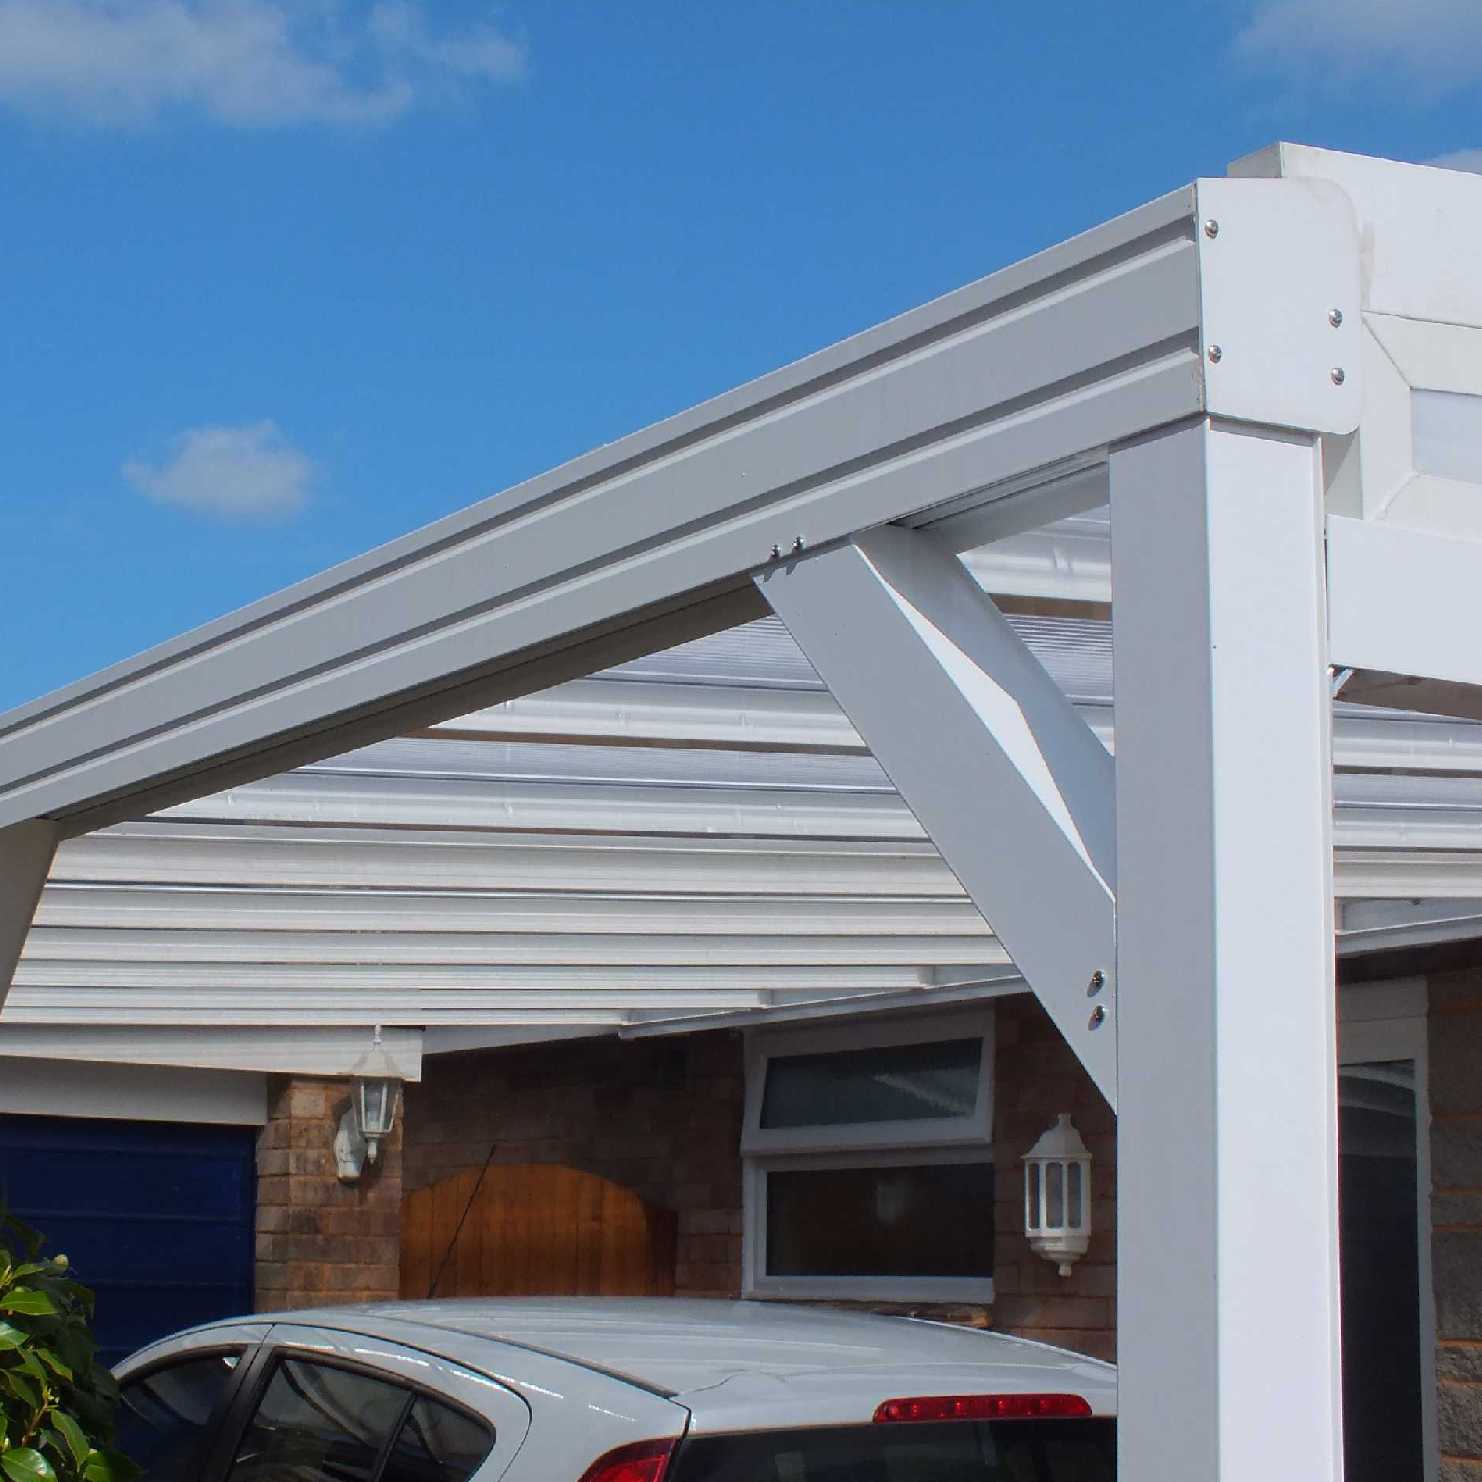 Buy Omega Smart Lean-To Canopy, White with 16mm Polycarbonate Glazing - 4.2m (W) x 4.5m (P), (3) Supporting Posts online today